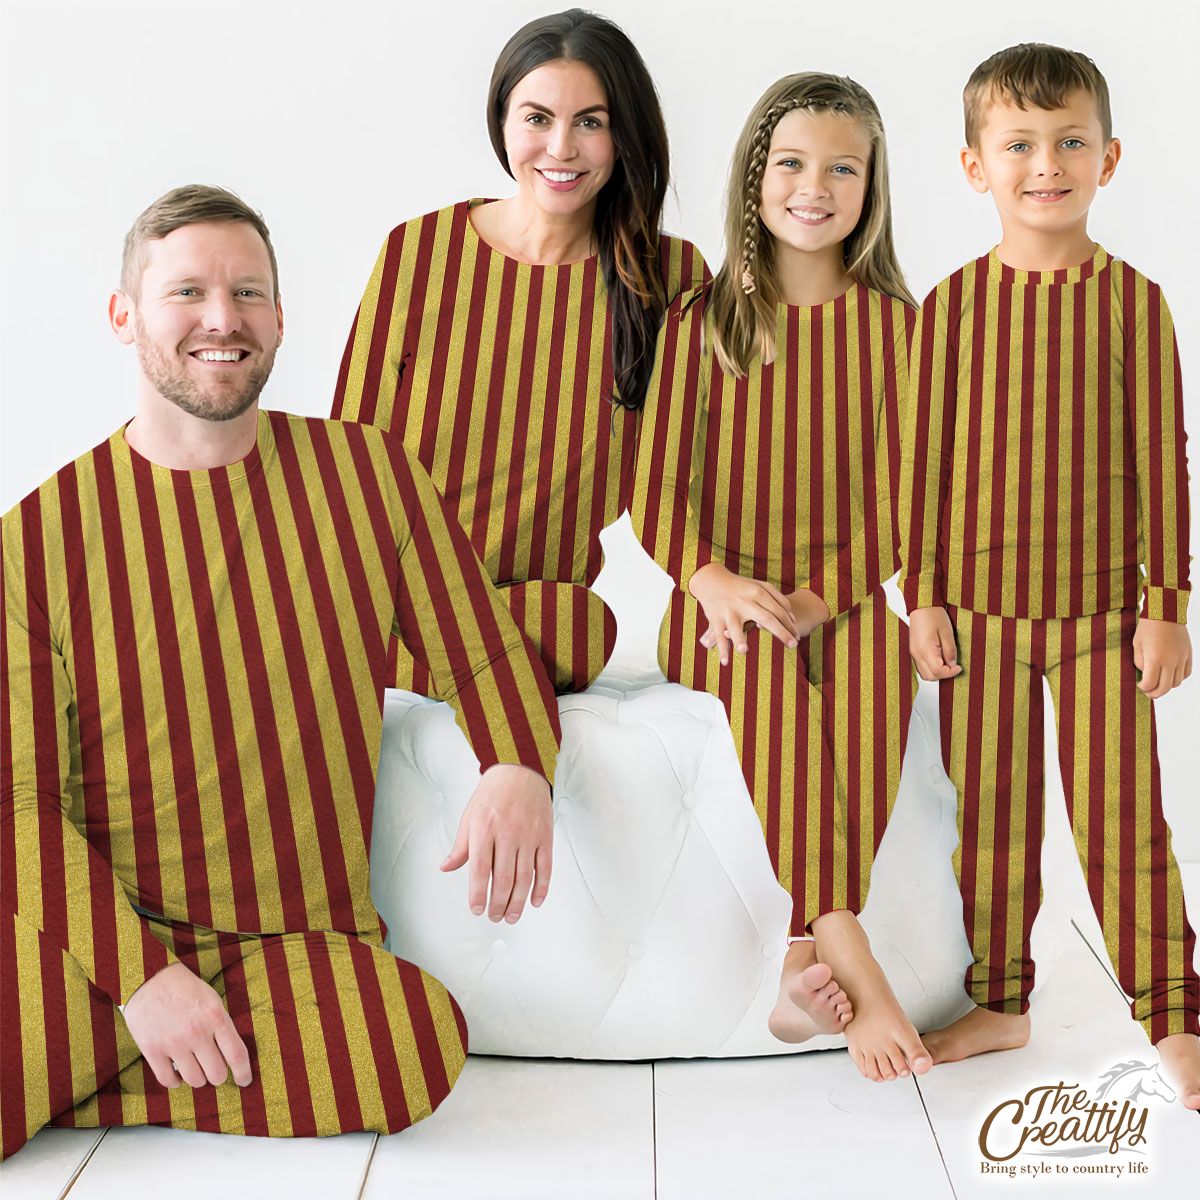 Christmas Gift Ideas, Christmas Gold, Gold Sparkle, Striped Gold On Red Pajamas